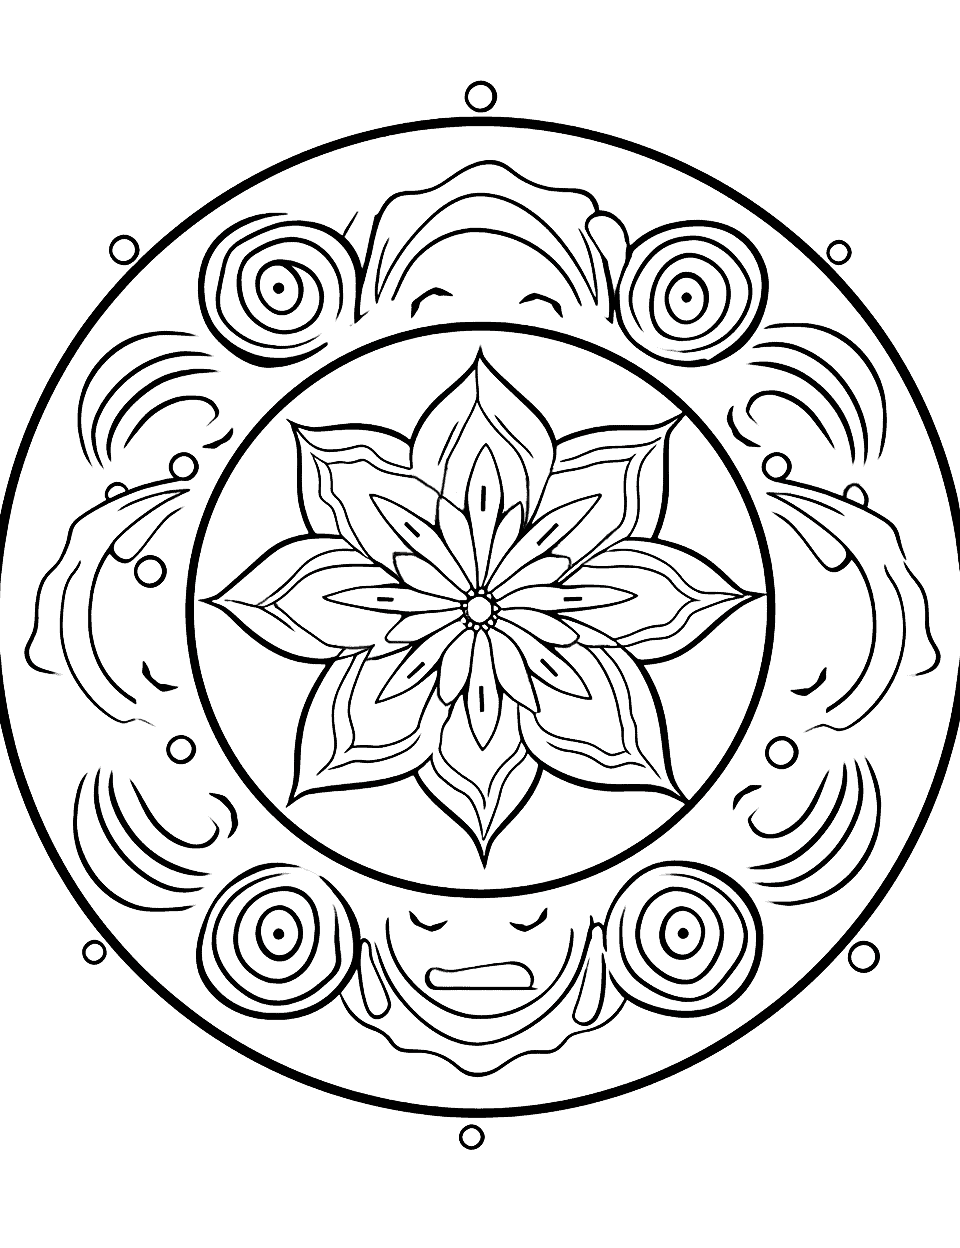 Joyful Water Mandala Coloring Page - A cute, underwater-themed mandala filled with waves and flowers.